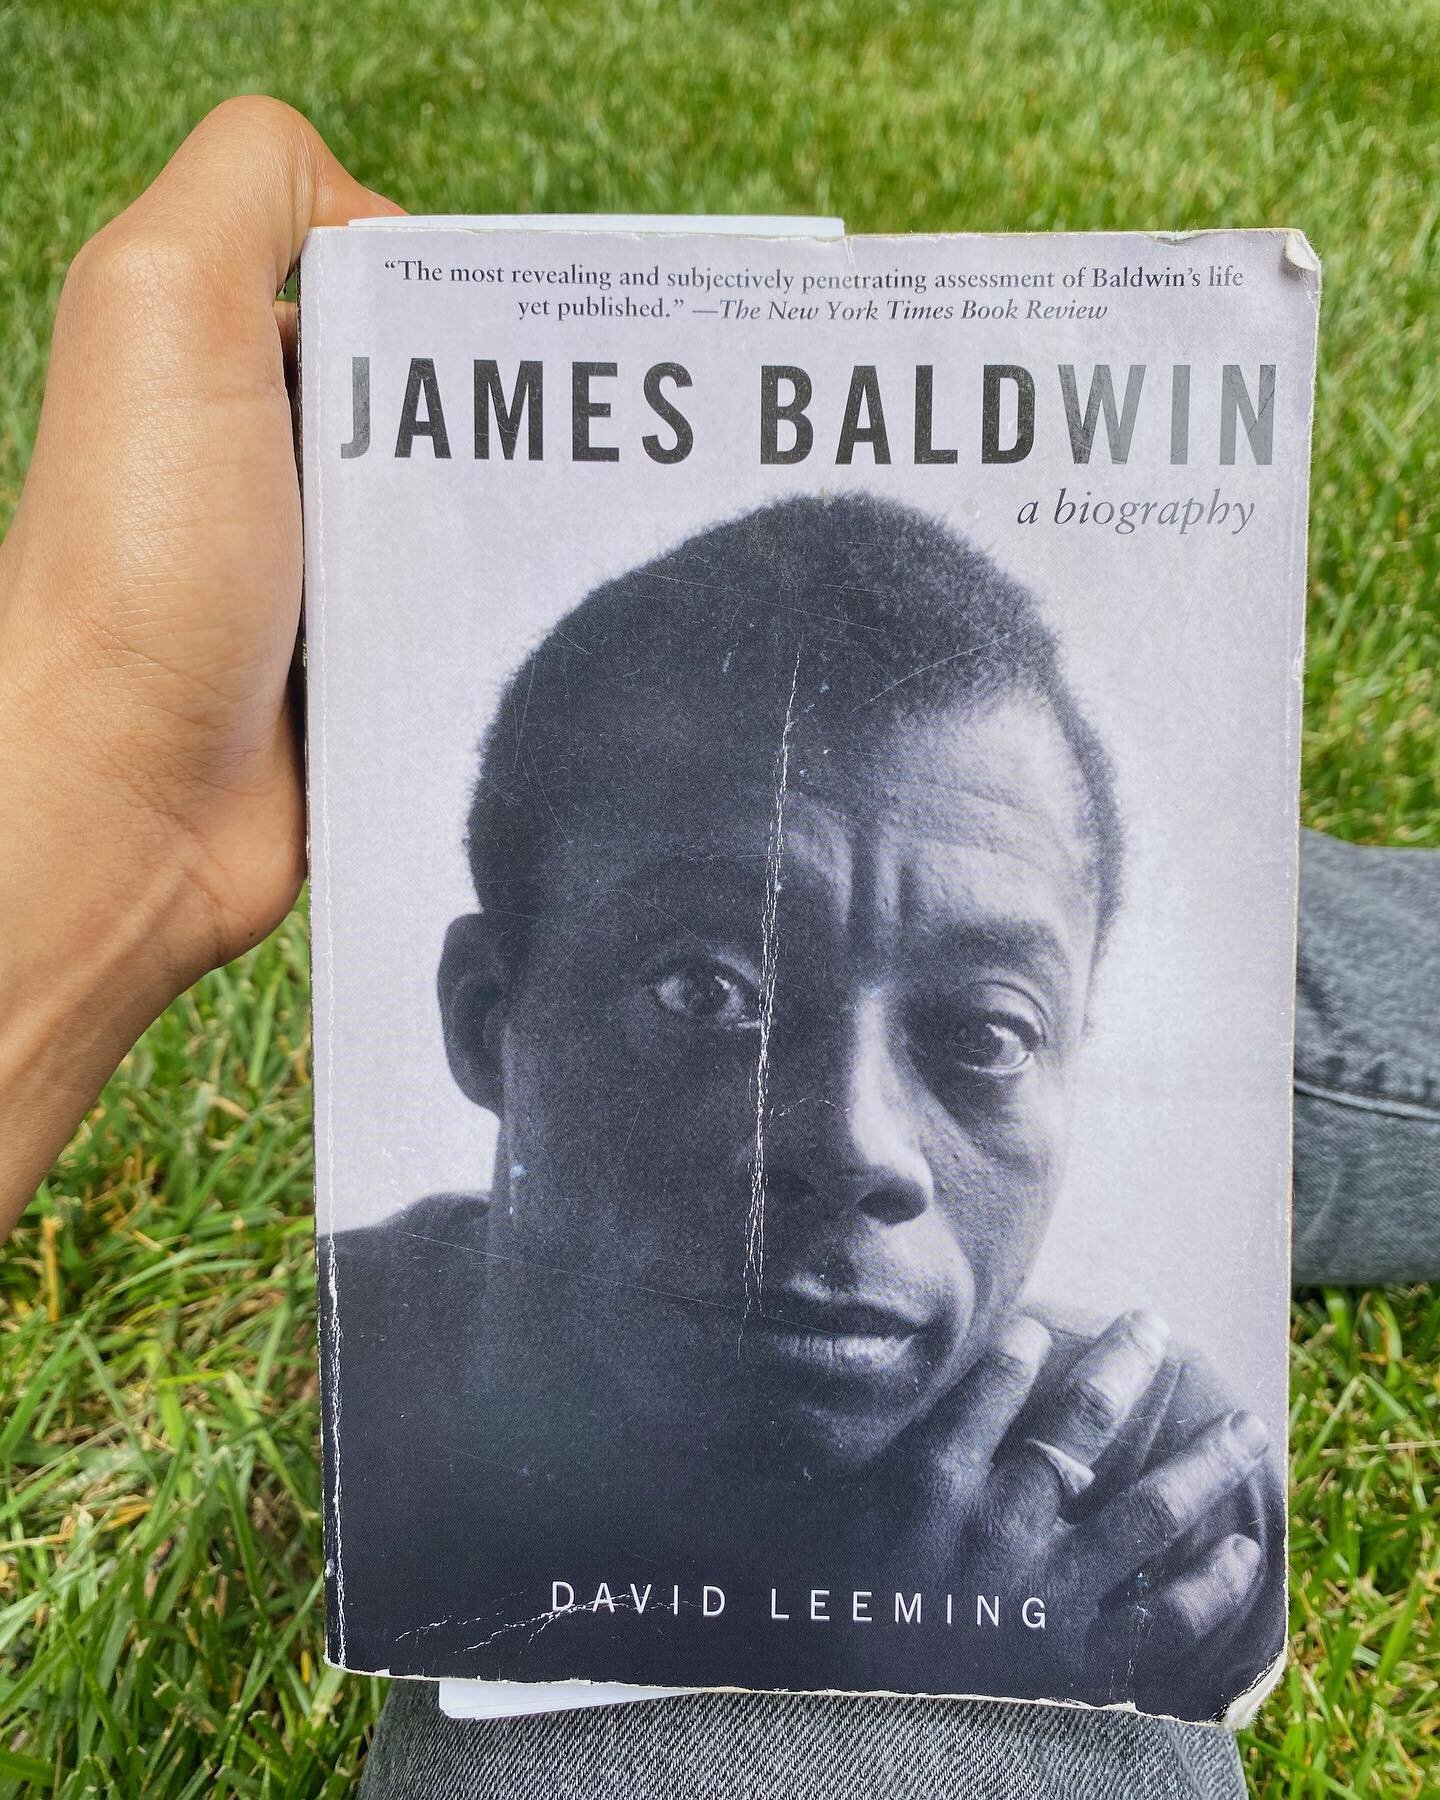 James Baldwin is my favorite writer. His work comforts &amp; empowers me (and also makes me cry??). Here&rsquo;s a small list of books &amp; (one) film that I&rsquo;ve loved or currently have queued up. This is not meant to facilitate a zoological vi